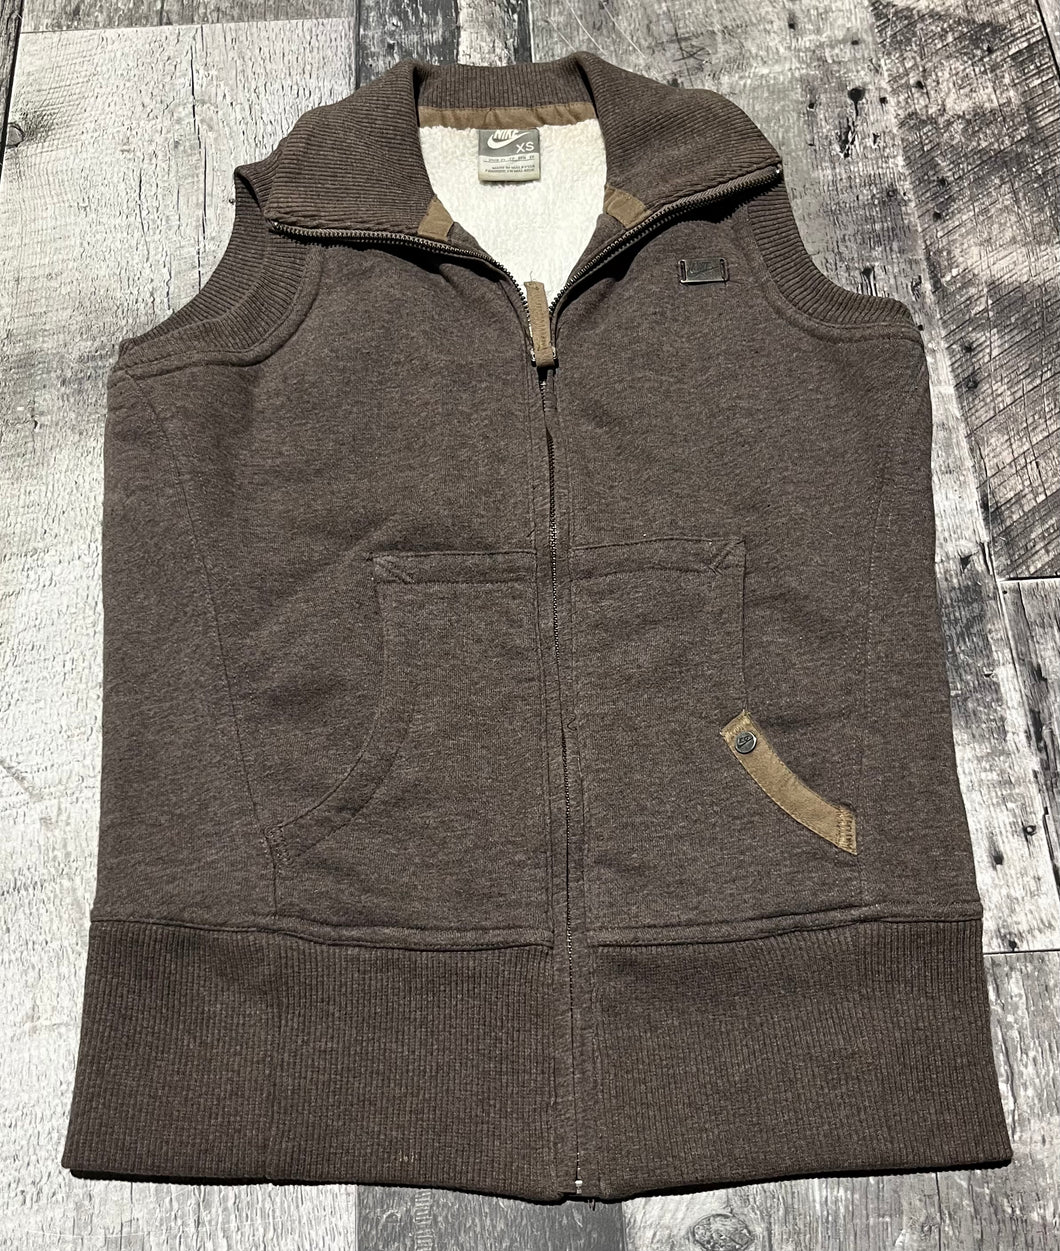 Nike brown vest - Hers size XS